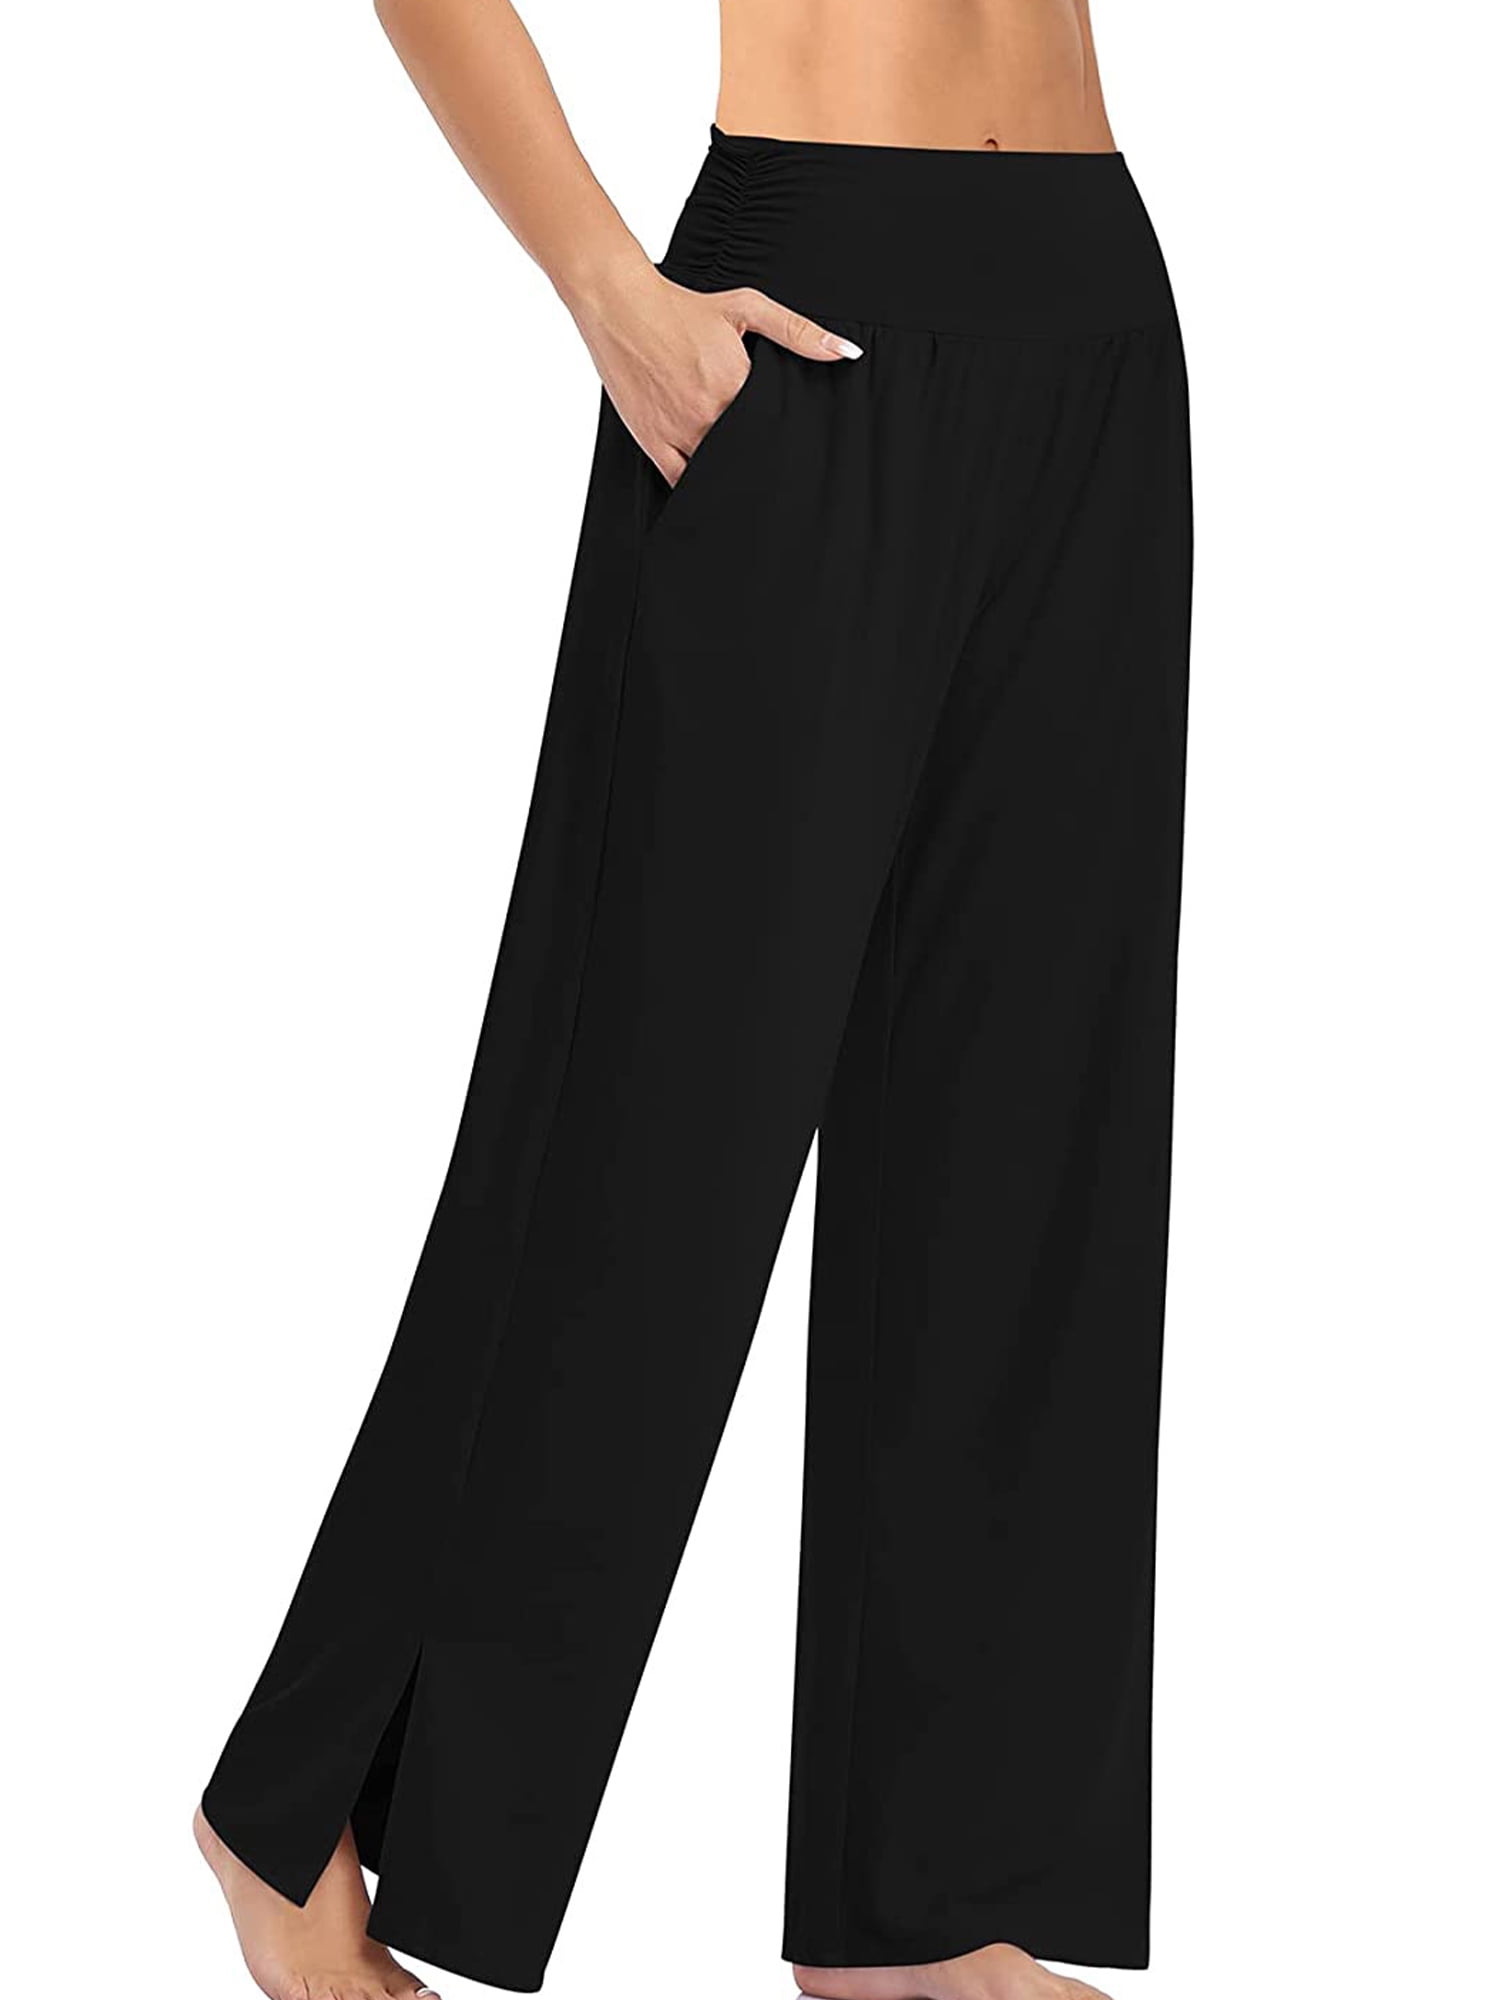 Frontwalk Comfy Pajamas Wide Leg Pant for Womens Casual Bootcut Yoga ...